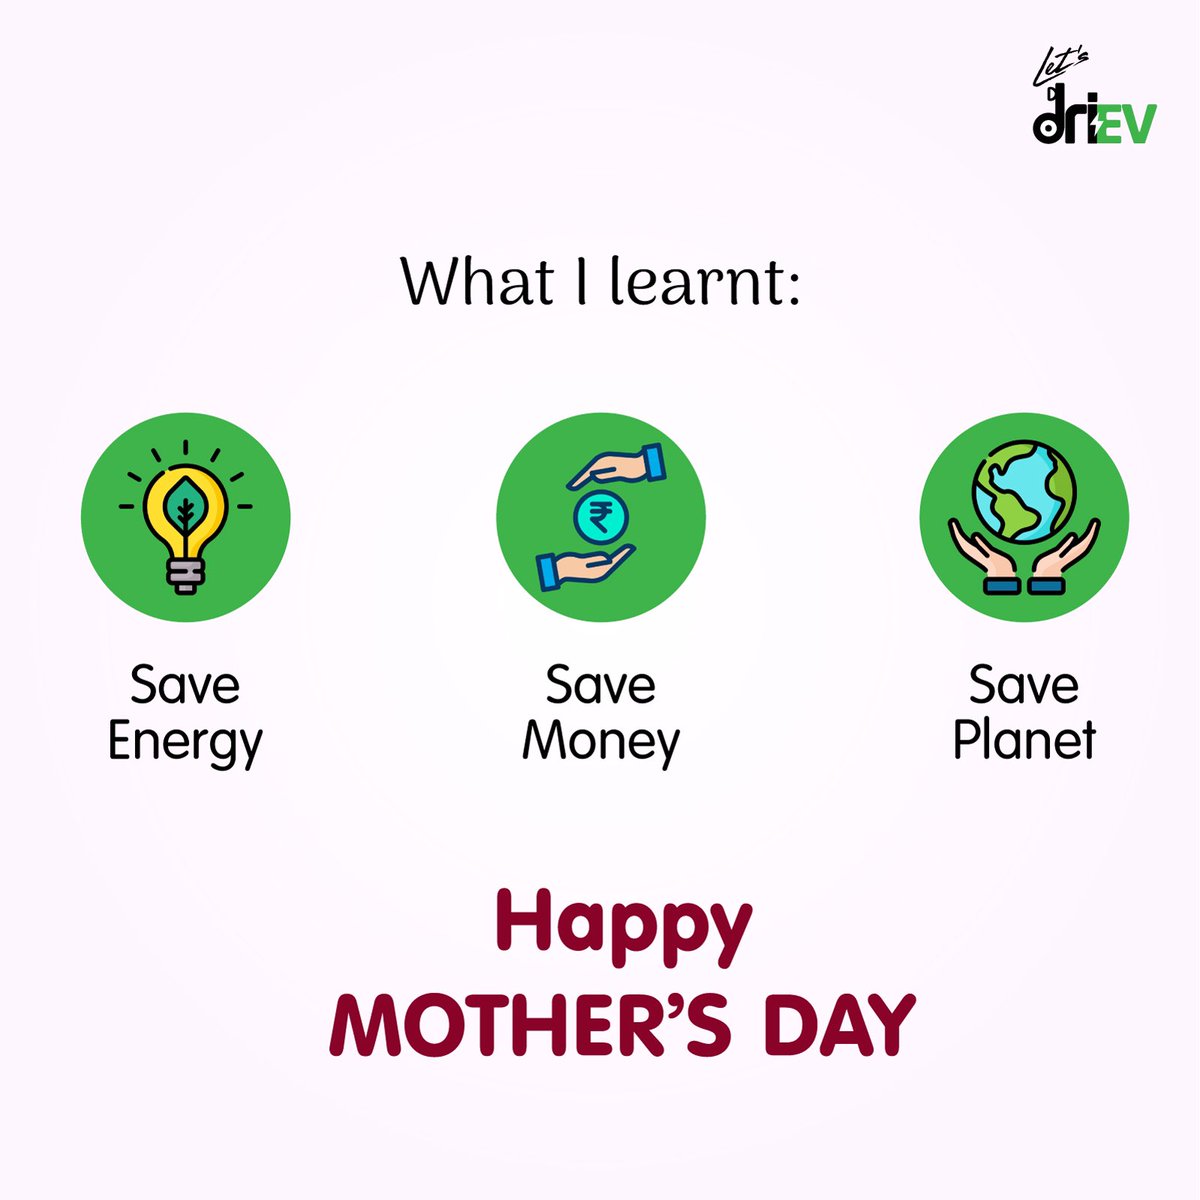 Remember the times when your mom asked to save? Looking back, it could have meant a lot more than just money!

Happy Mother’s Day!

#Mothersday #SaveForFuture #SustainableModel #LetsdriEV #motherhood